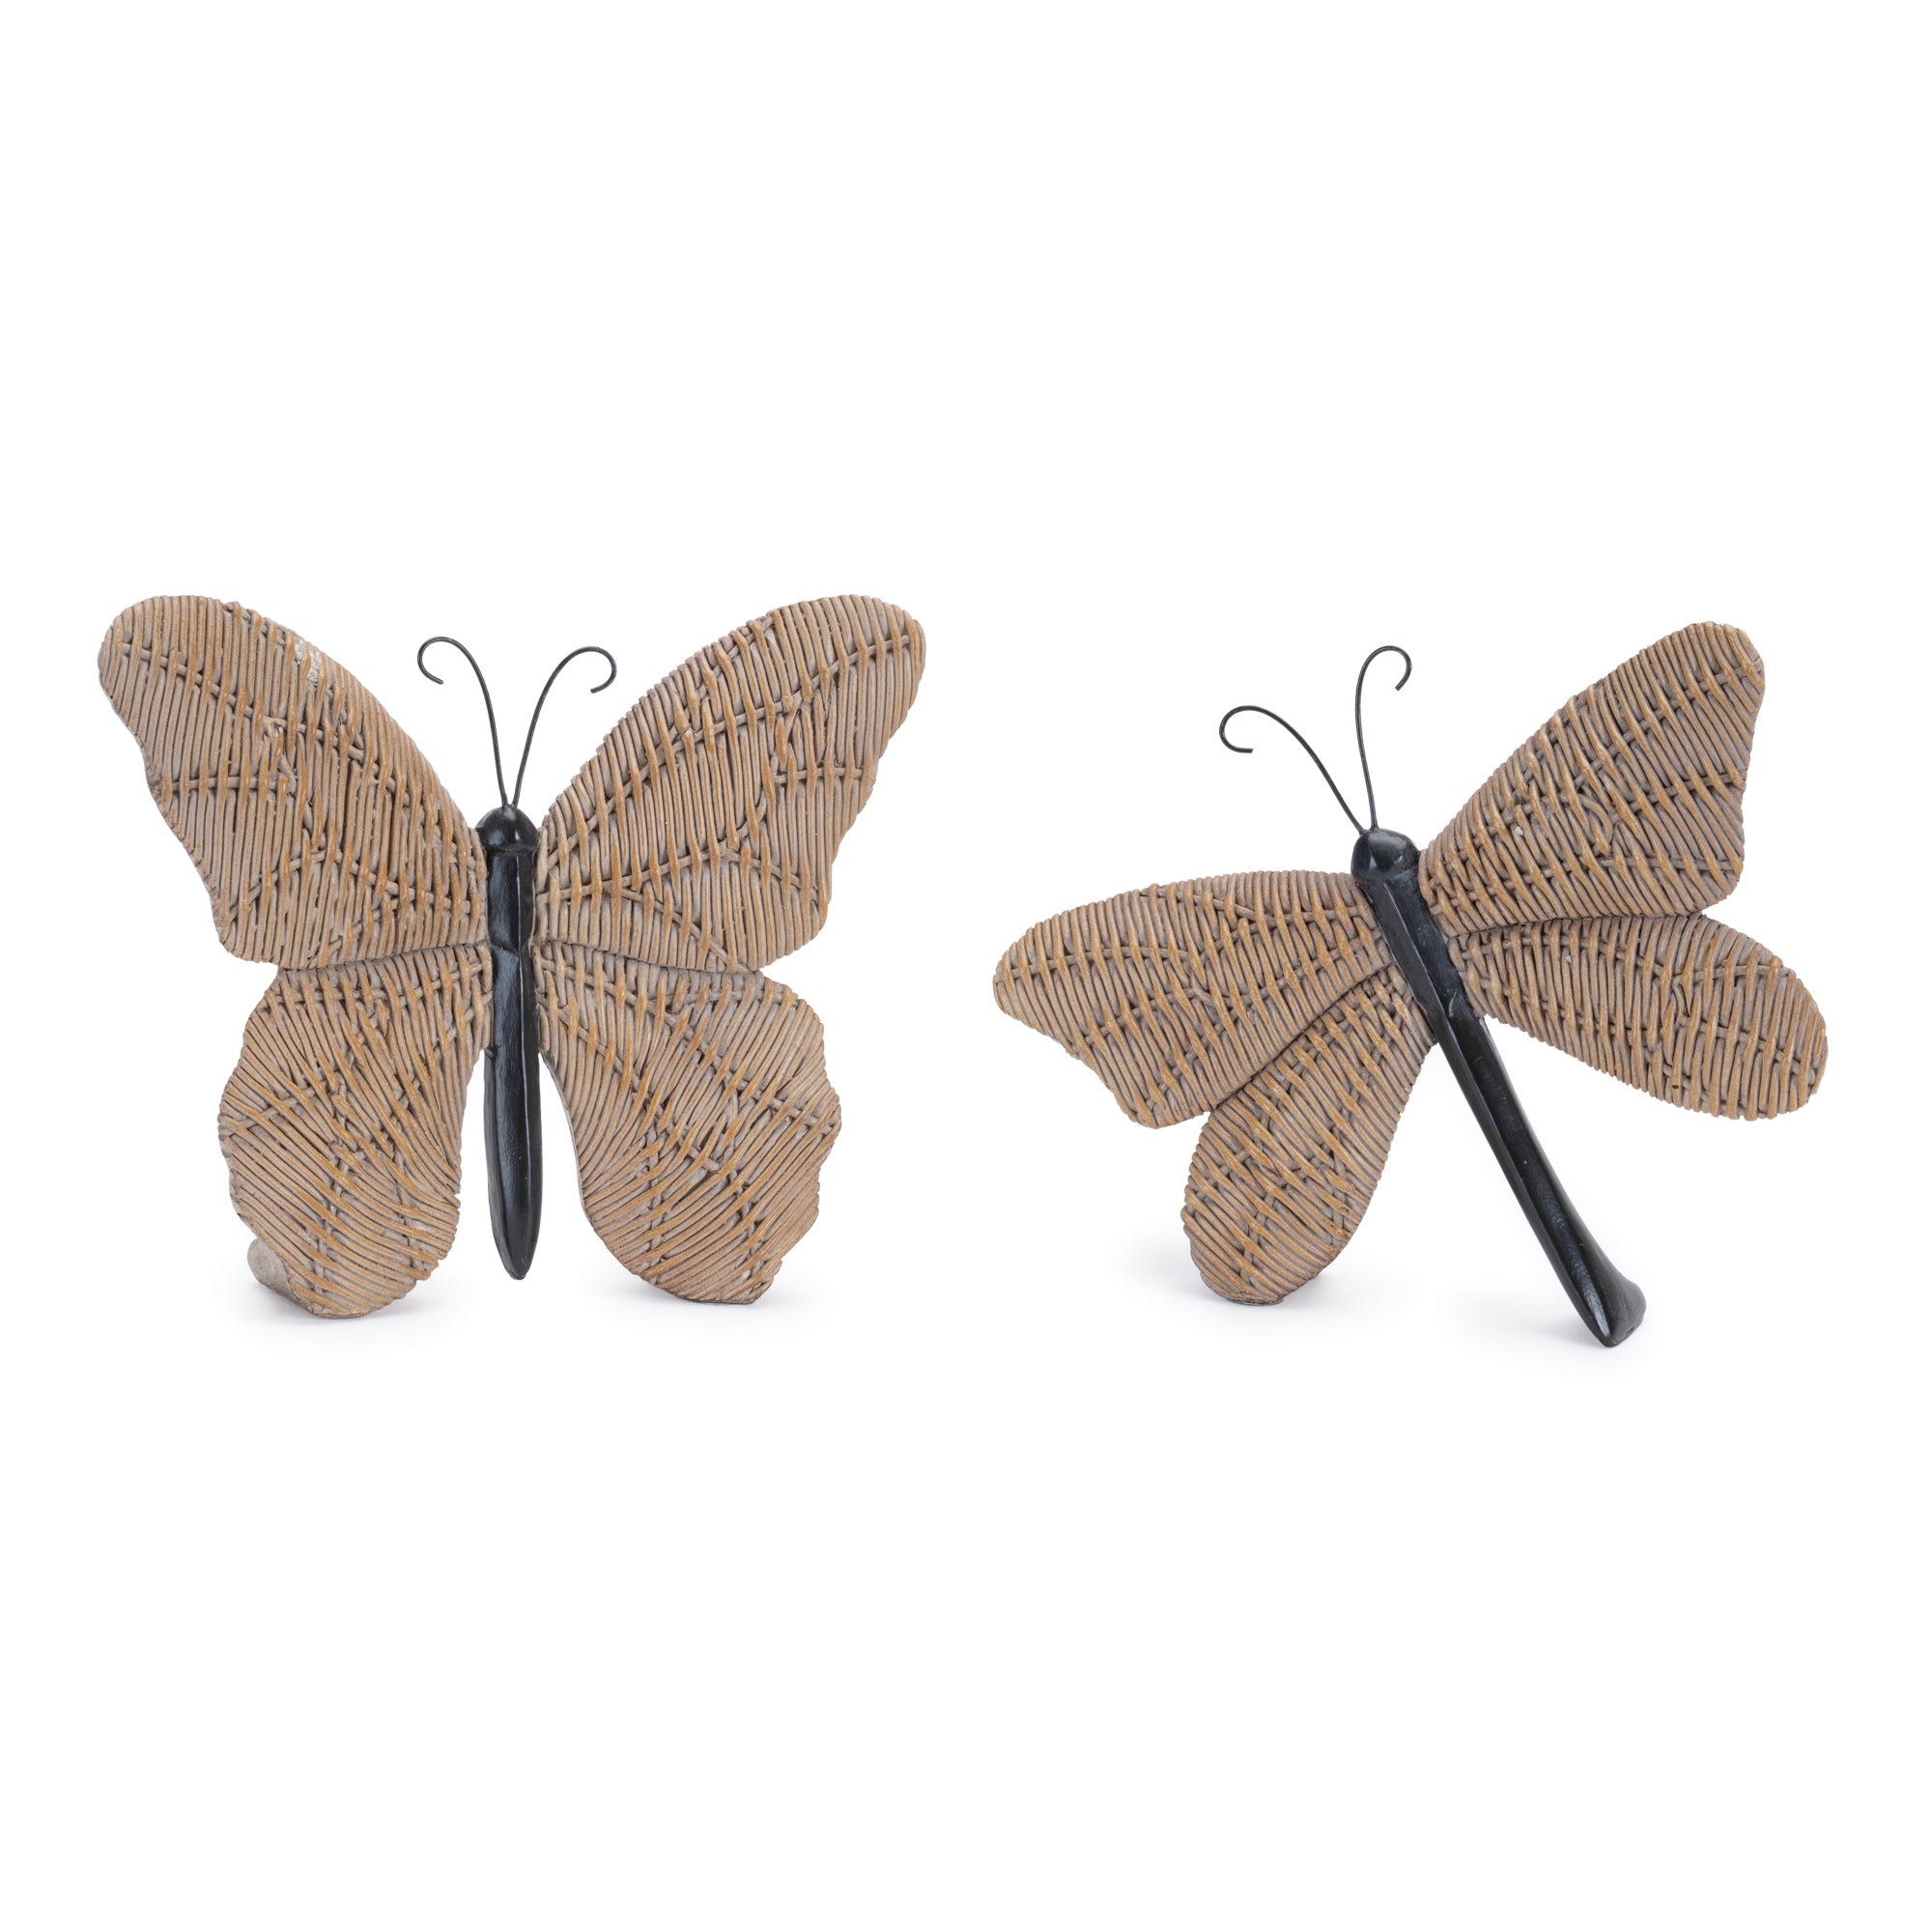 Wicker Design Butterfly and Dragonfly Shelf Sitter (Set of 4)